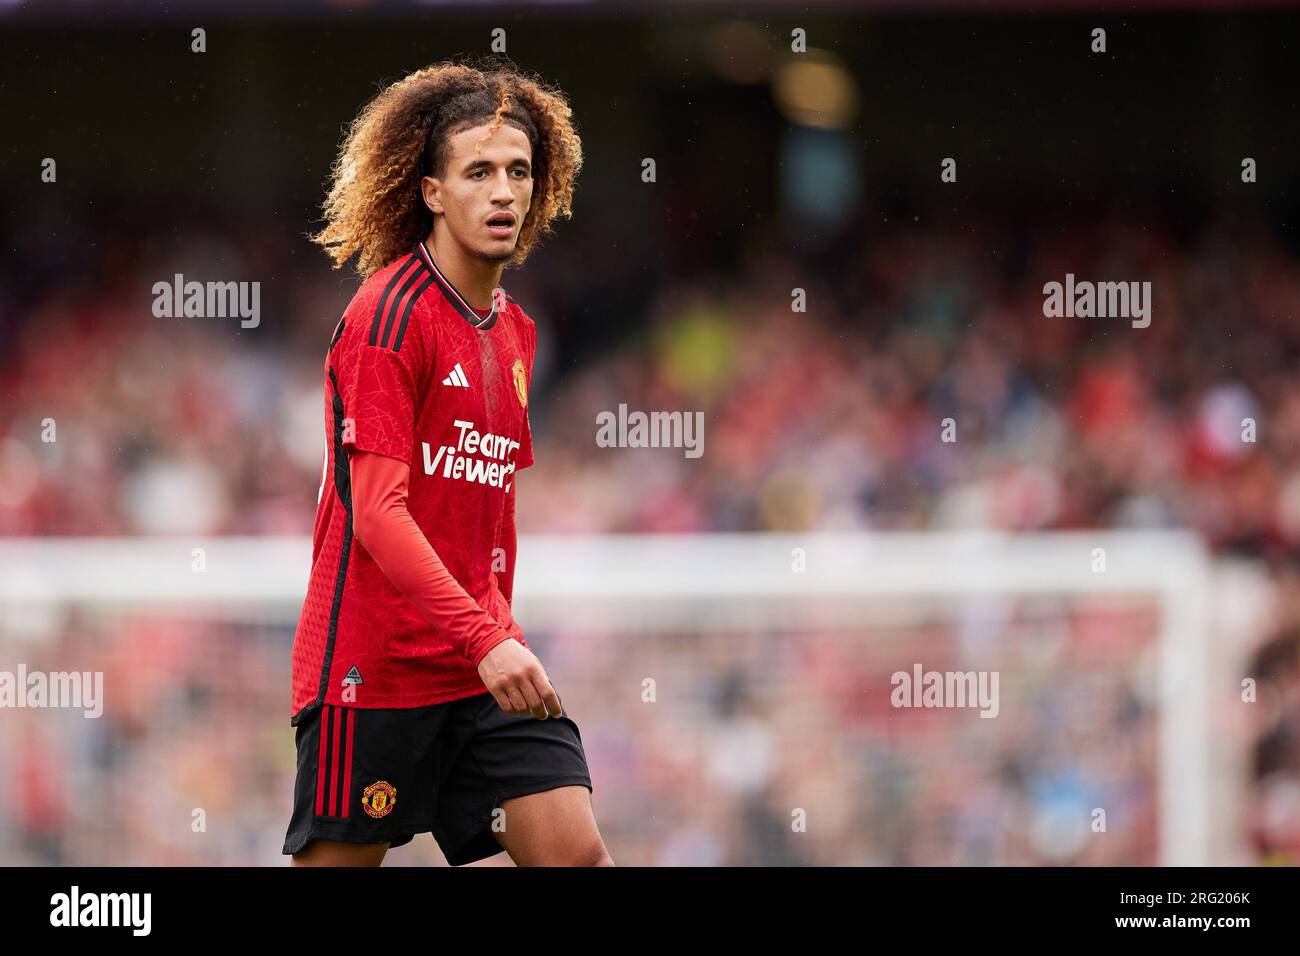 Dublin, Ireland, August 6, 2023, Hannibal Mejbri of Manchester United during the pre-season friendly football match between Manchester United and Athletic Club on August 6, 2023 at Aviva Stadium in Dublin, Ireland Stock Photo